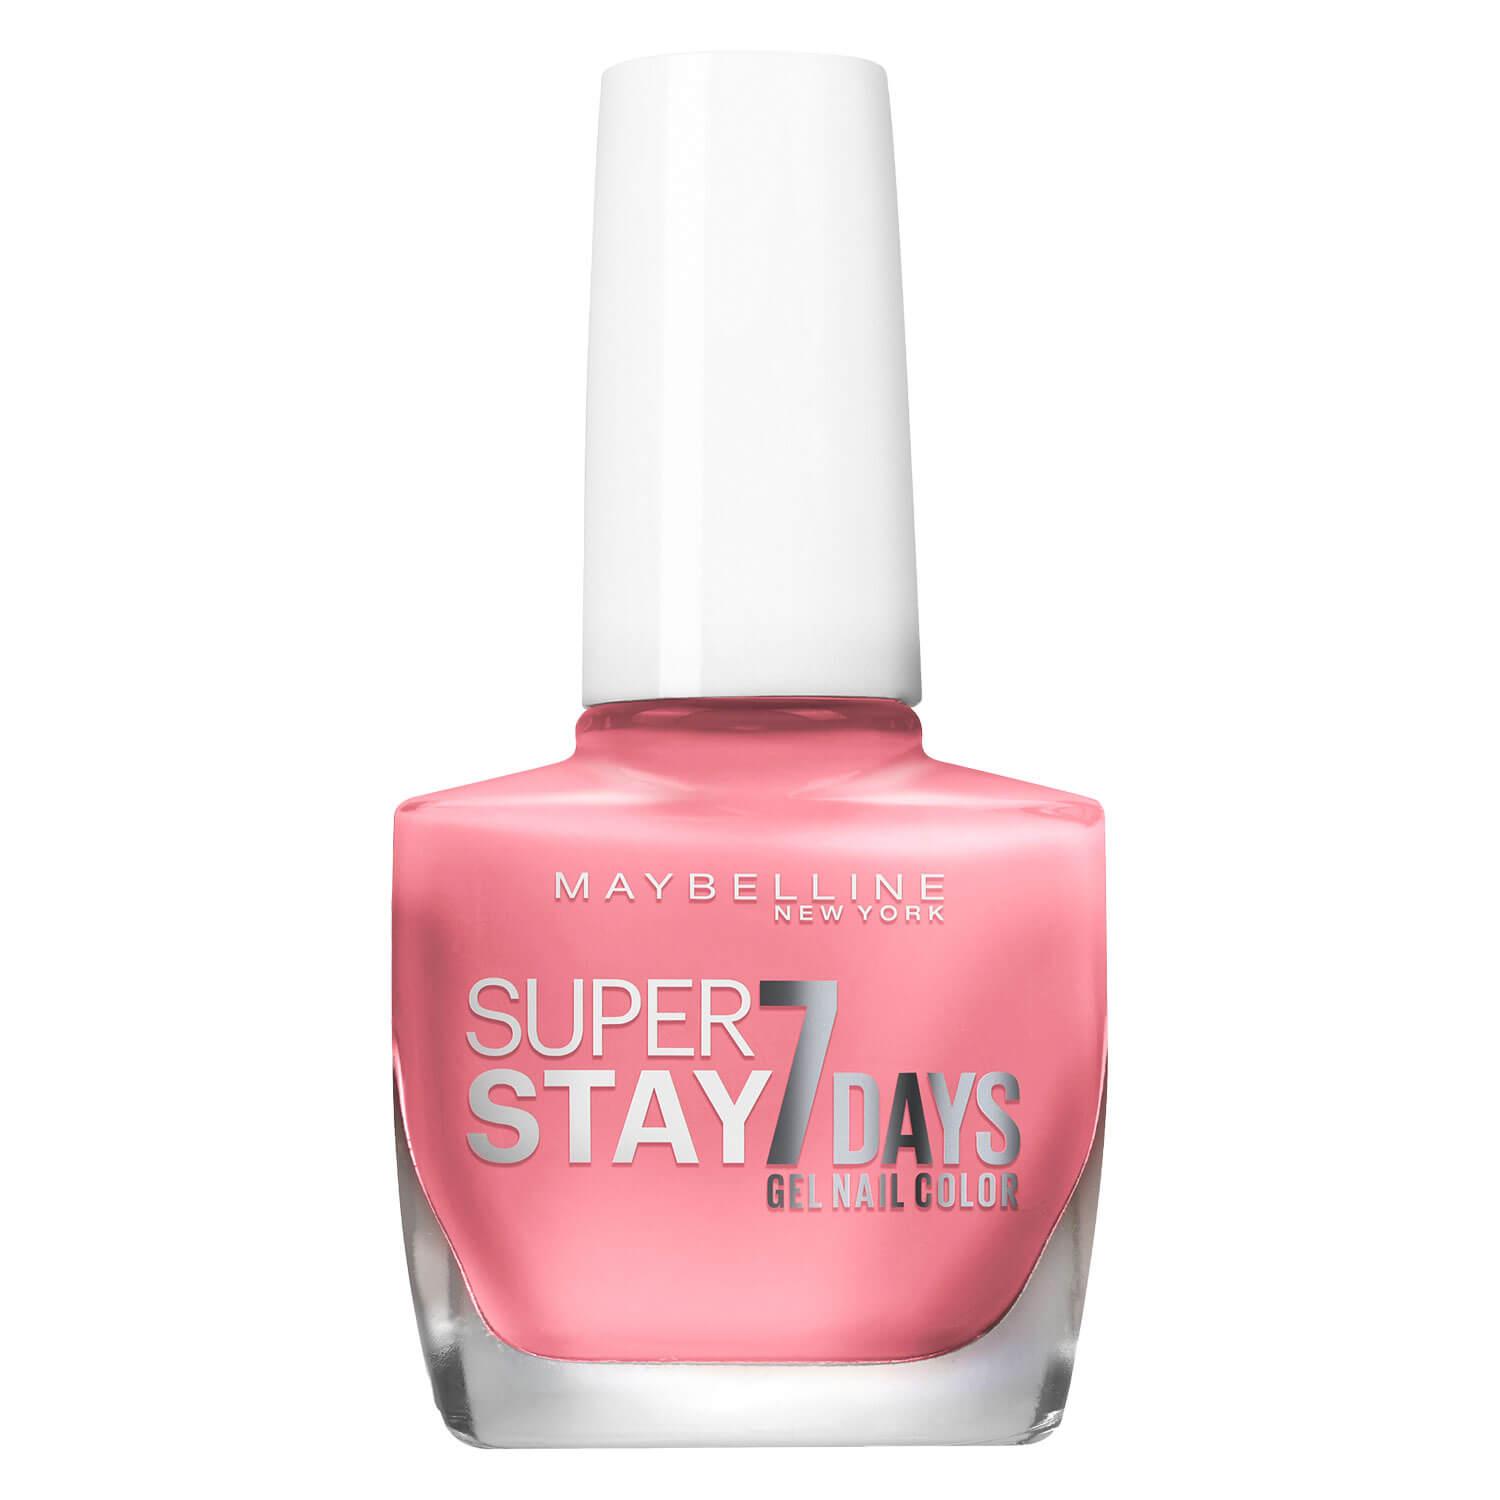 Maybelline NY Nails - Super Stay 7 Days Nagellack Nr. 926 Pink about it